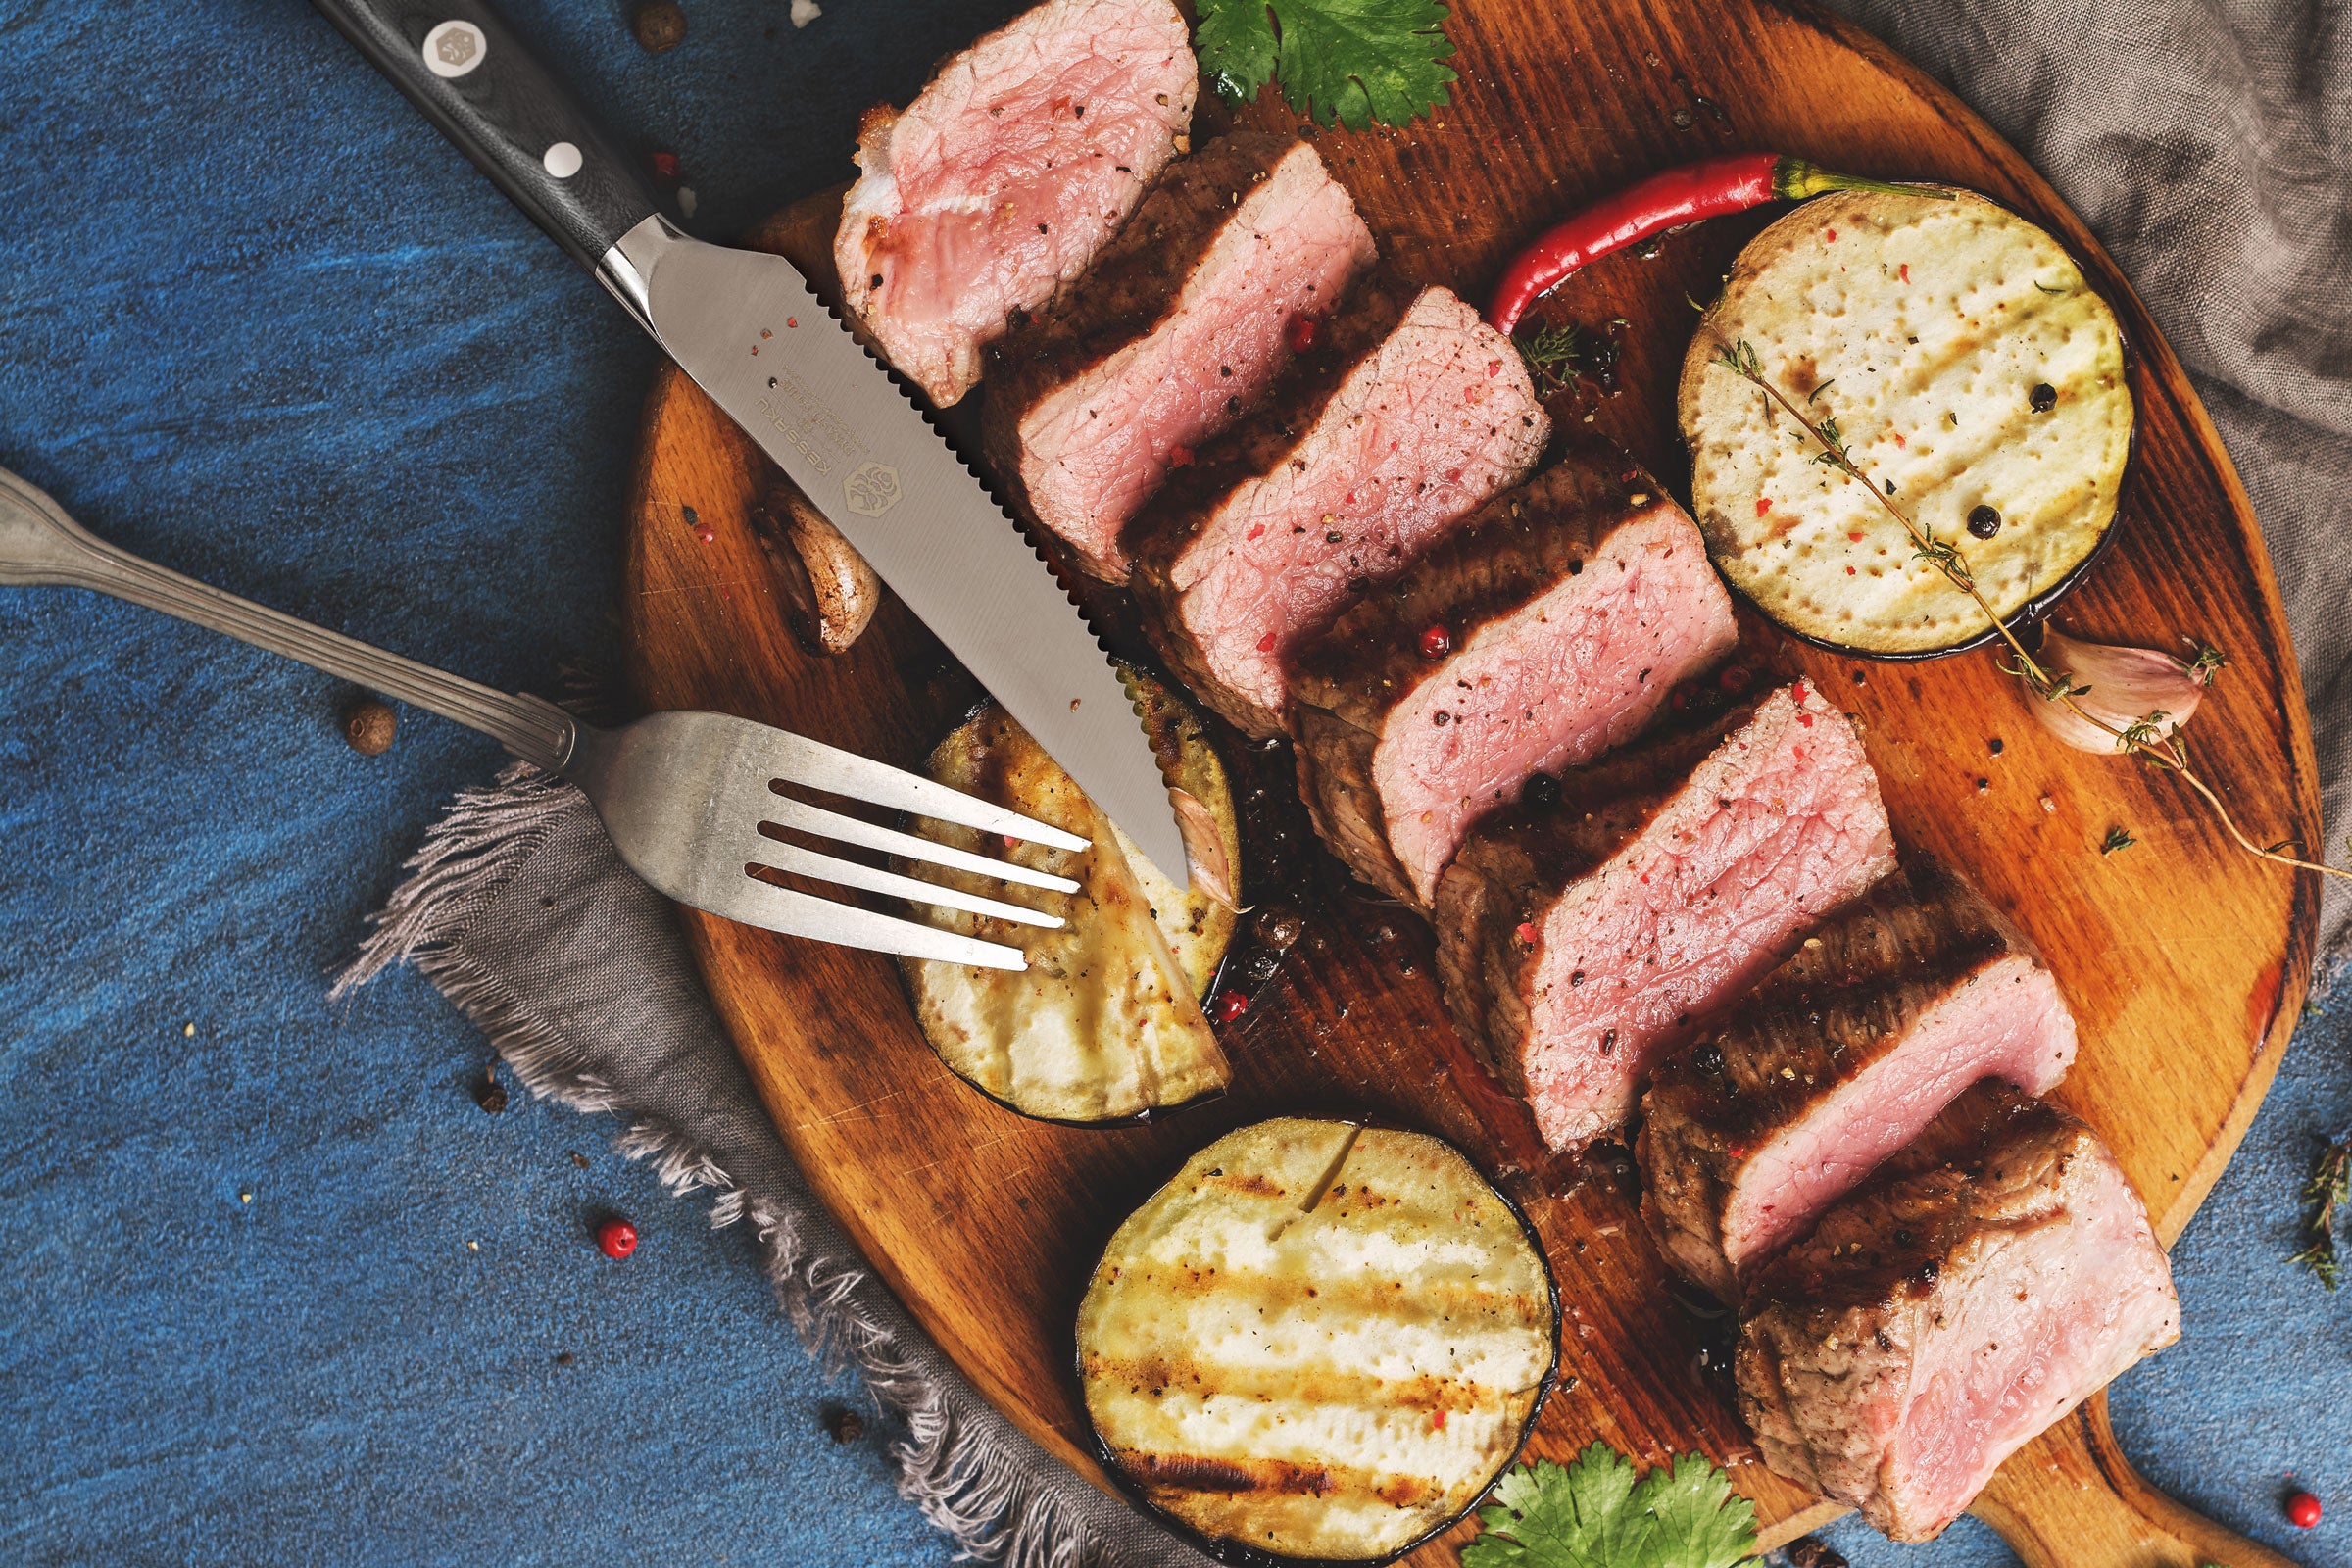 The Dynasty Steak Knife with sliced steak and grilled zucchini